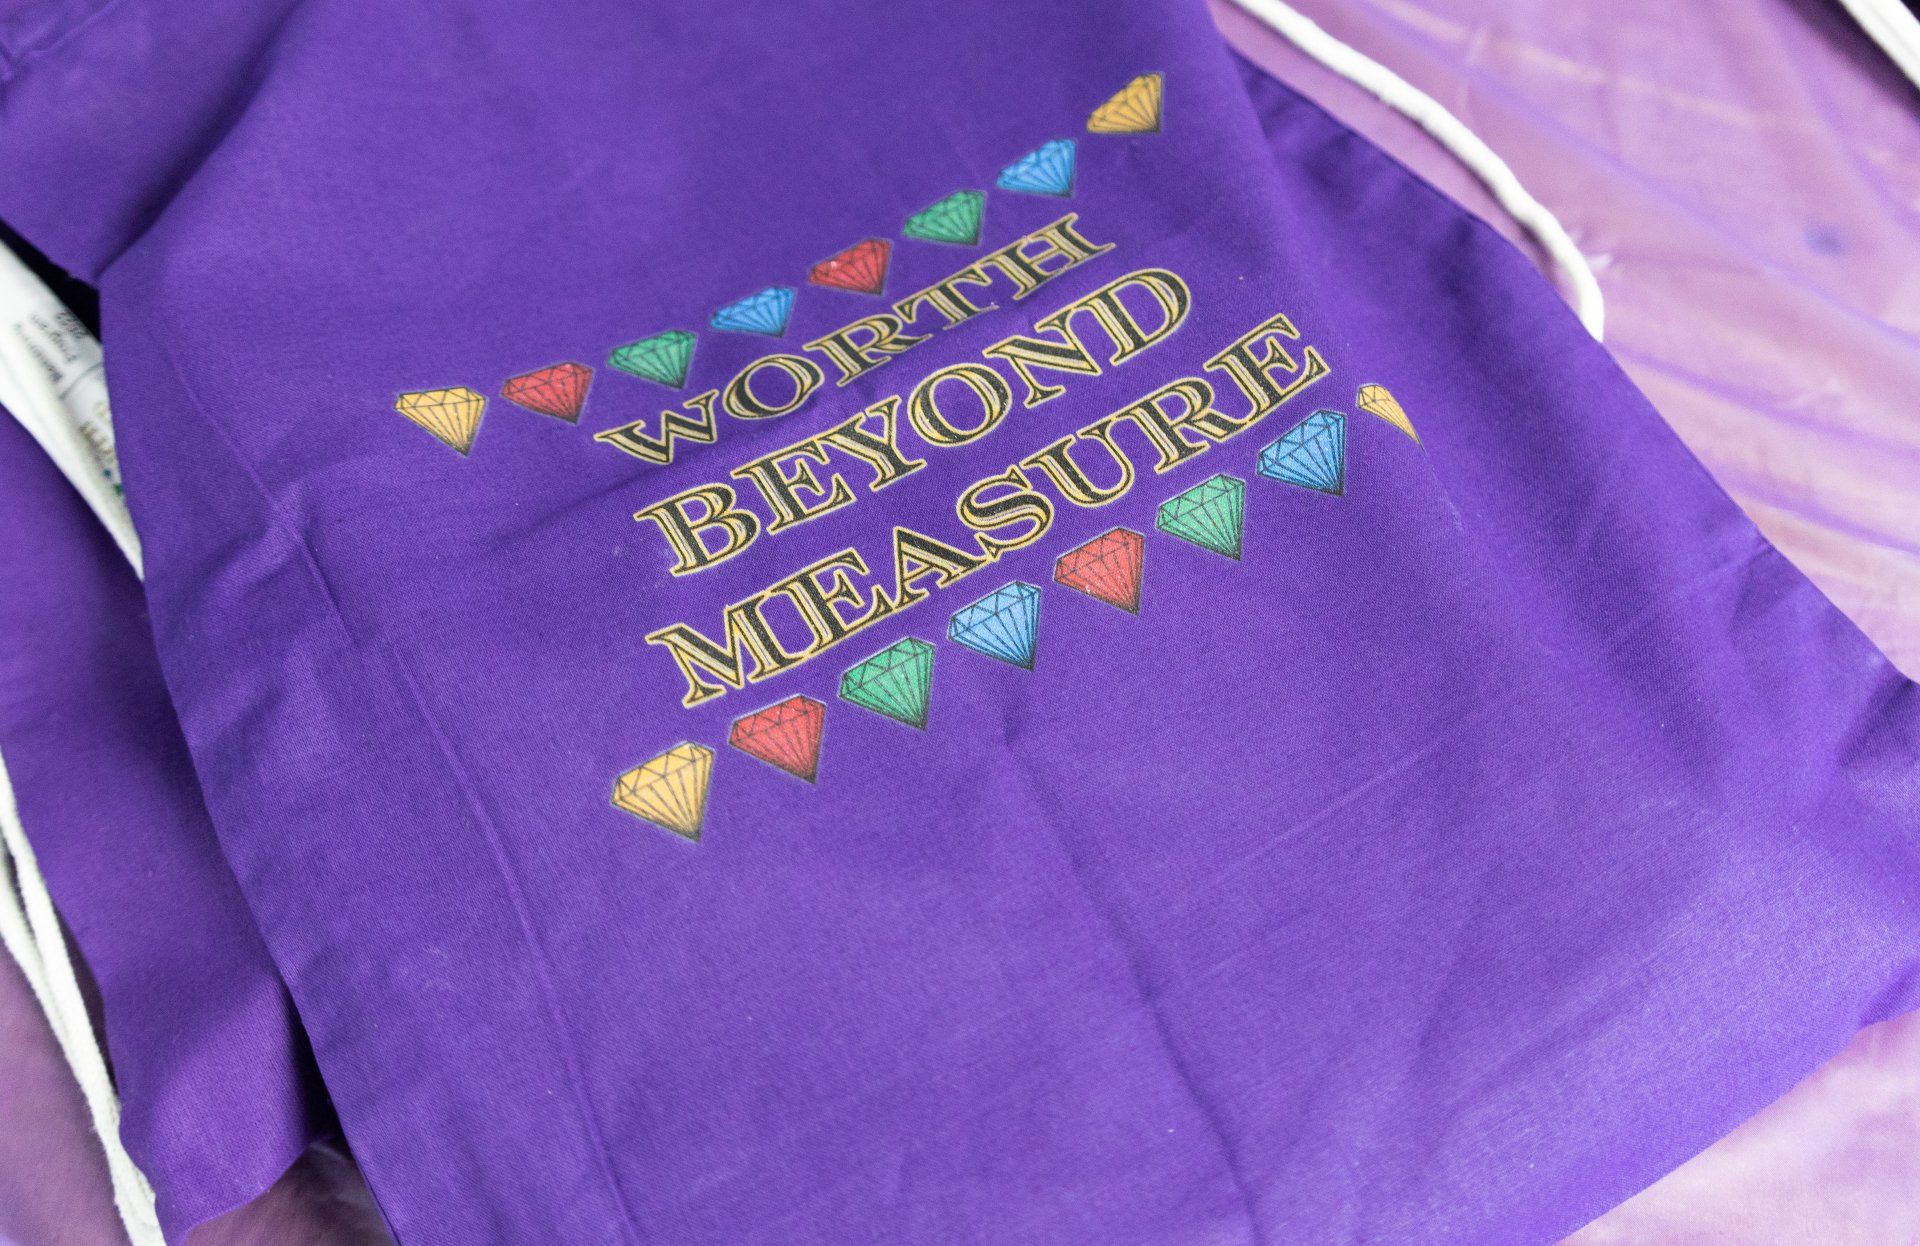 a purple shirt that says worth beyond measure